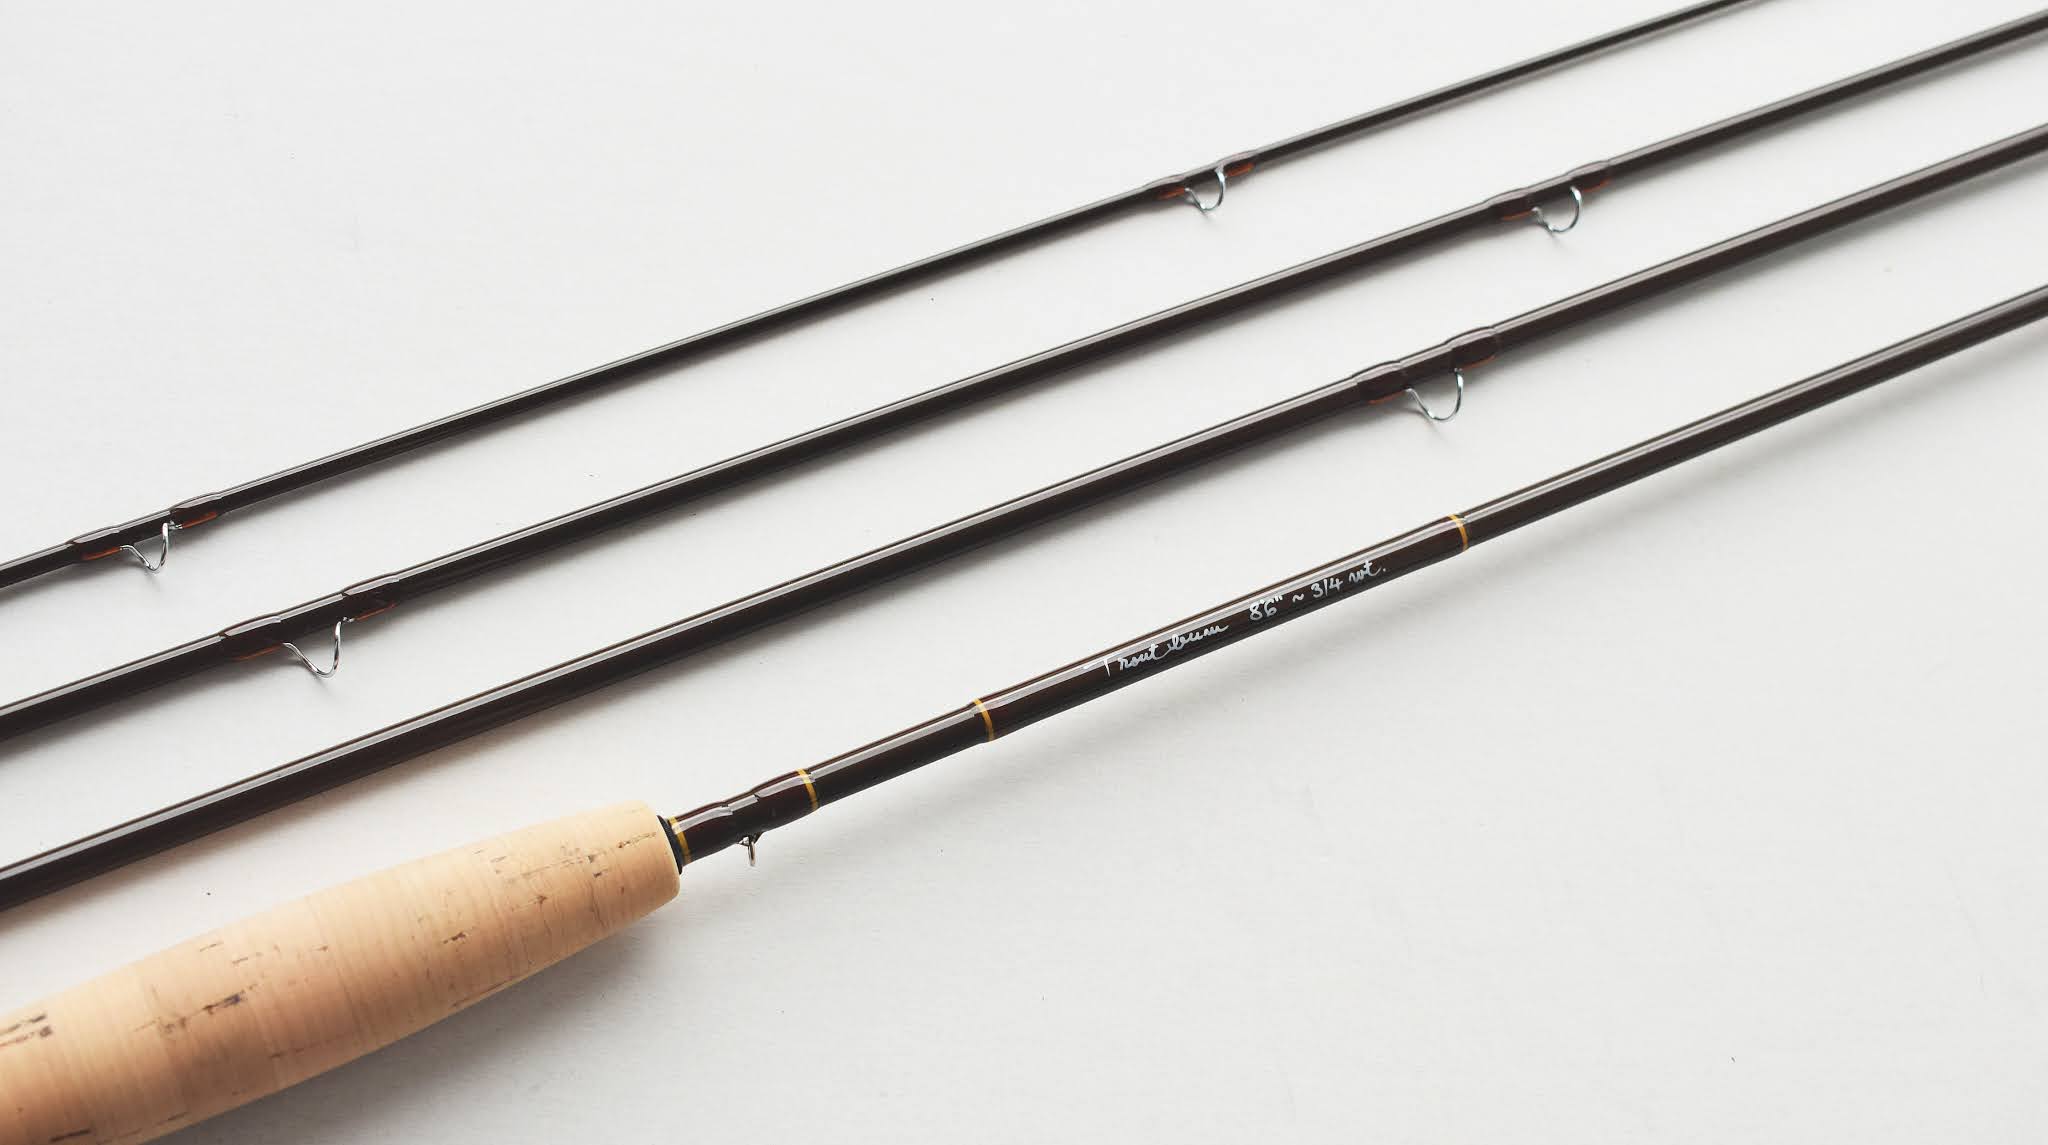 Handcrafted graphite and fiberglass fly rods: October 2020